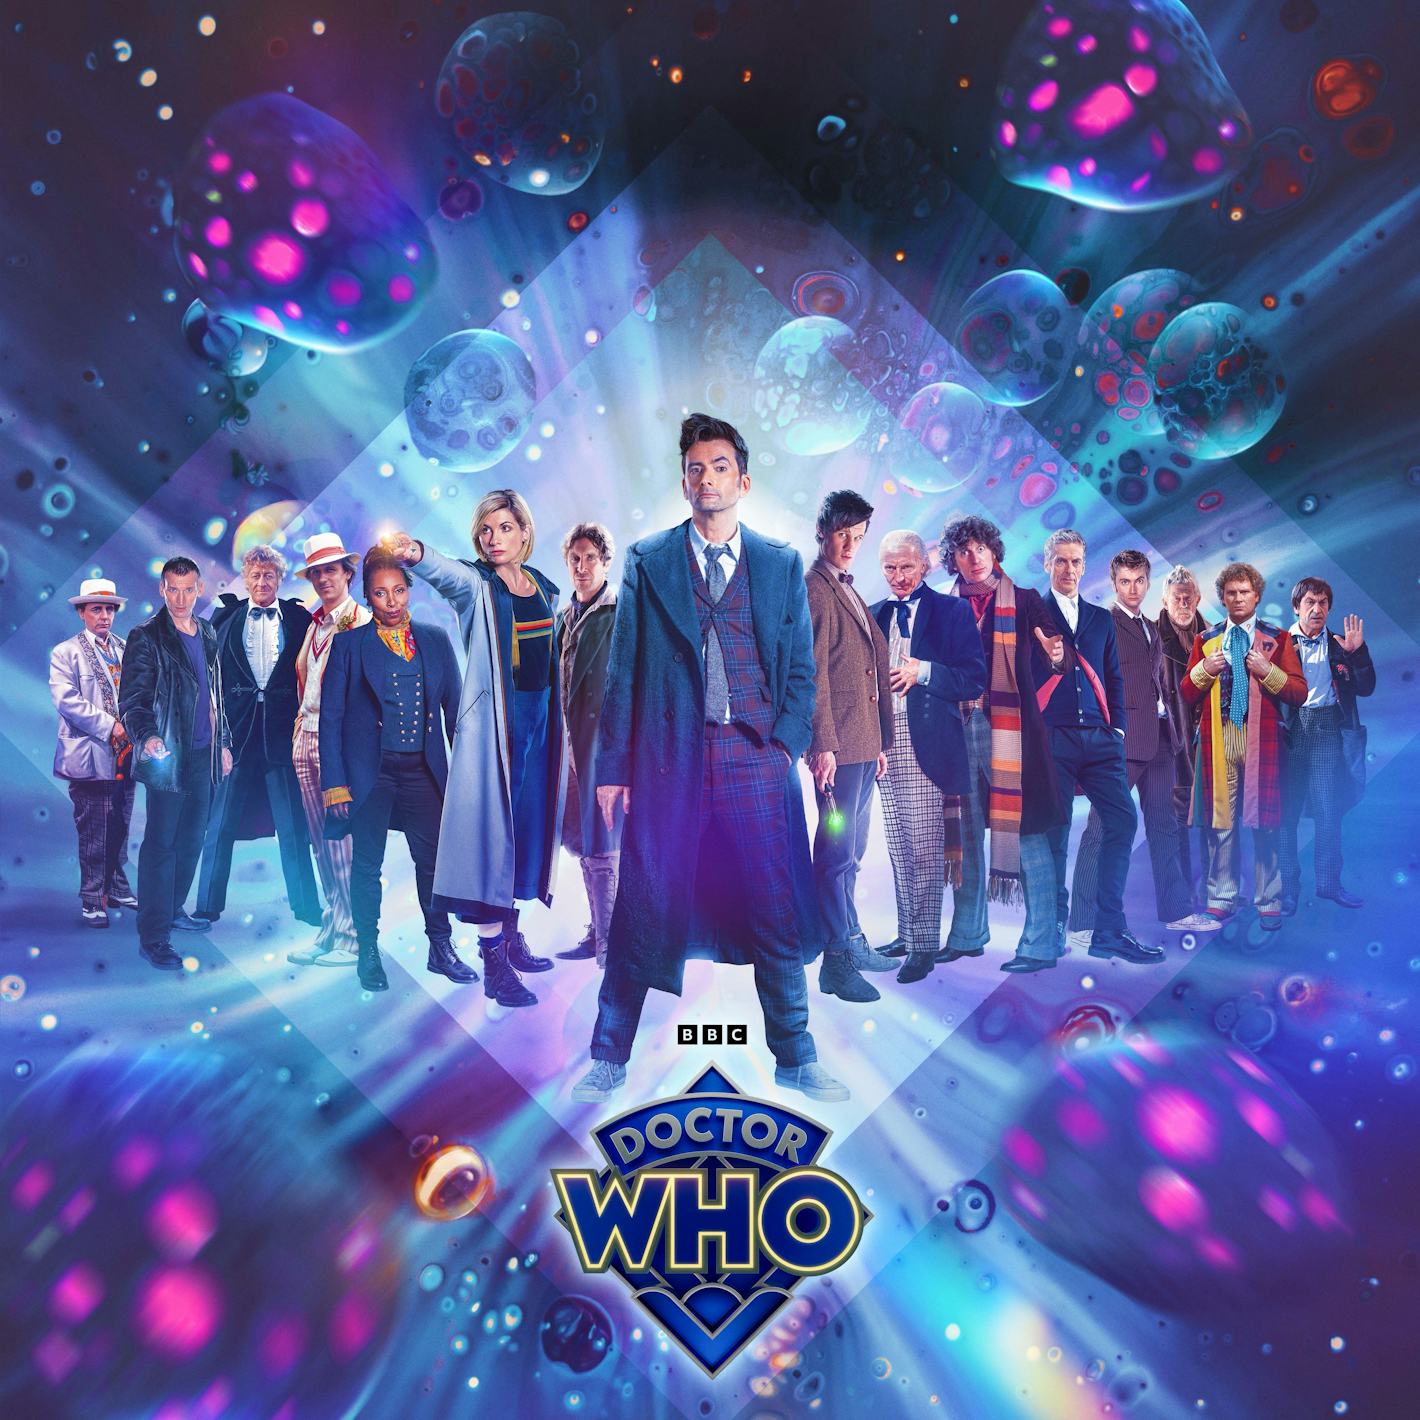 'Doctor Who' 60th Anniversary release date, cast, and trailer for the